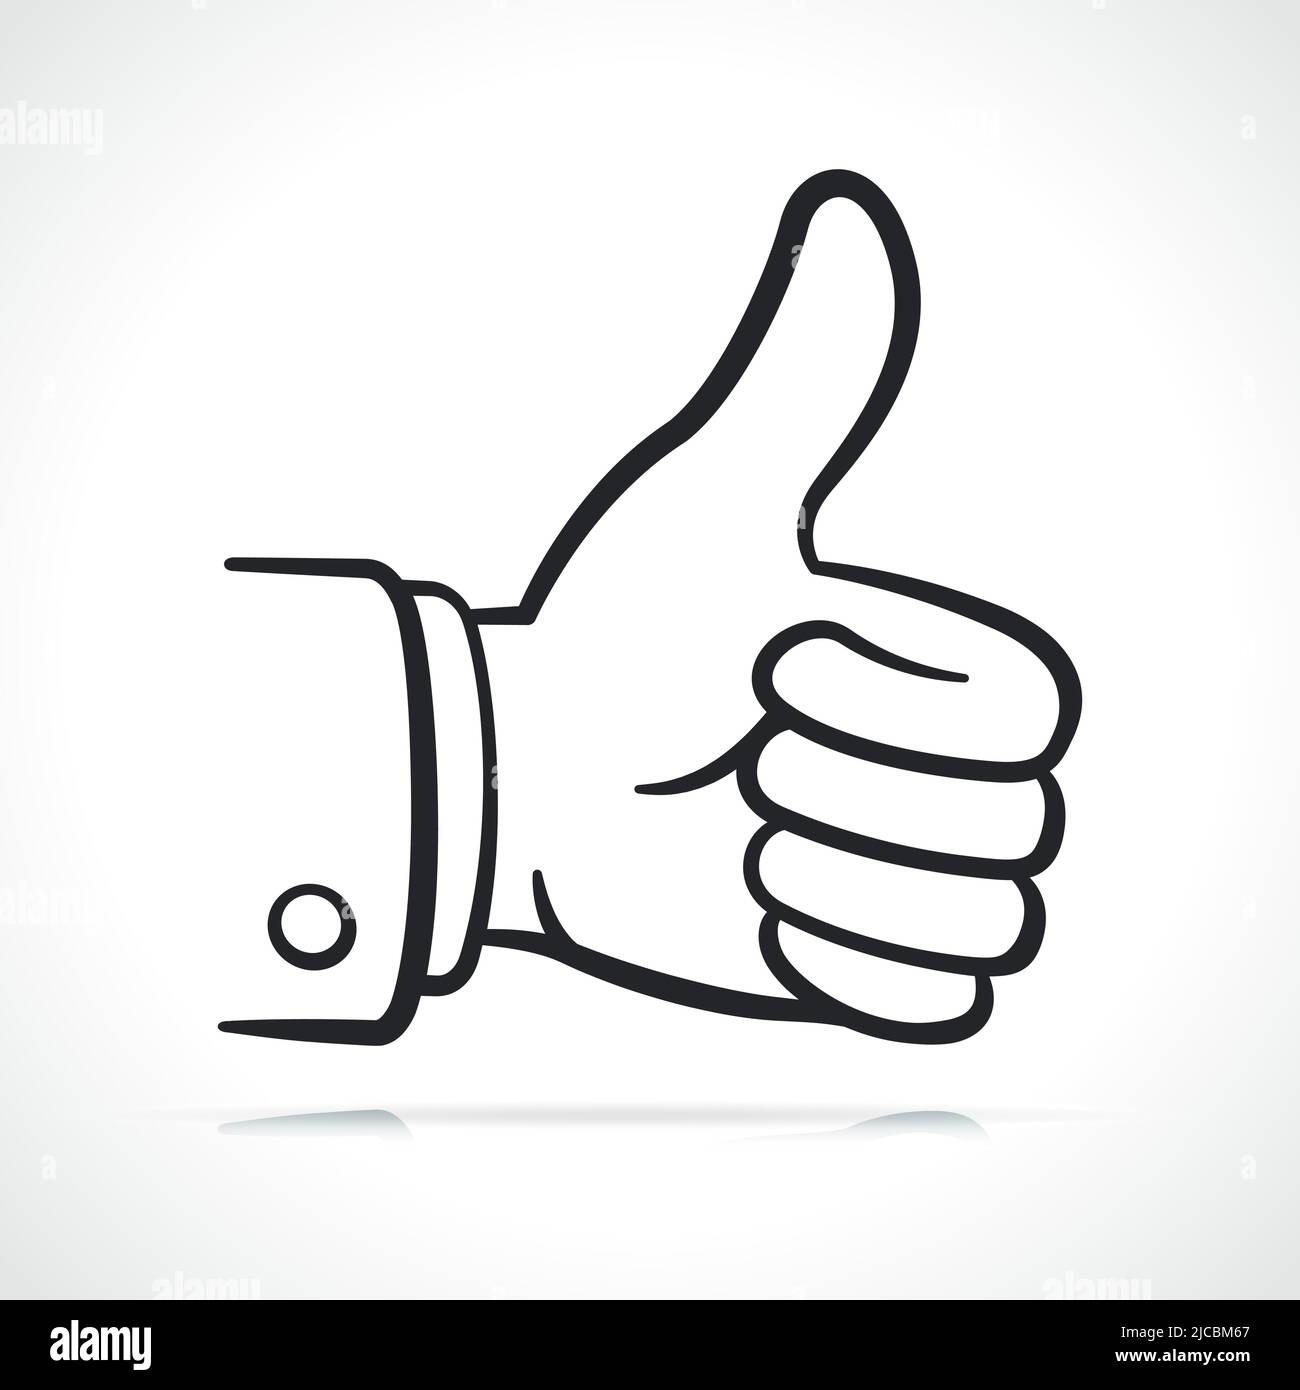 Thumb up black drawing contour isolated illustration Stock Vector